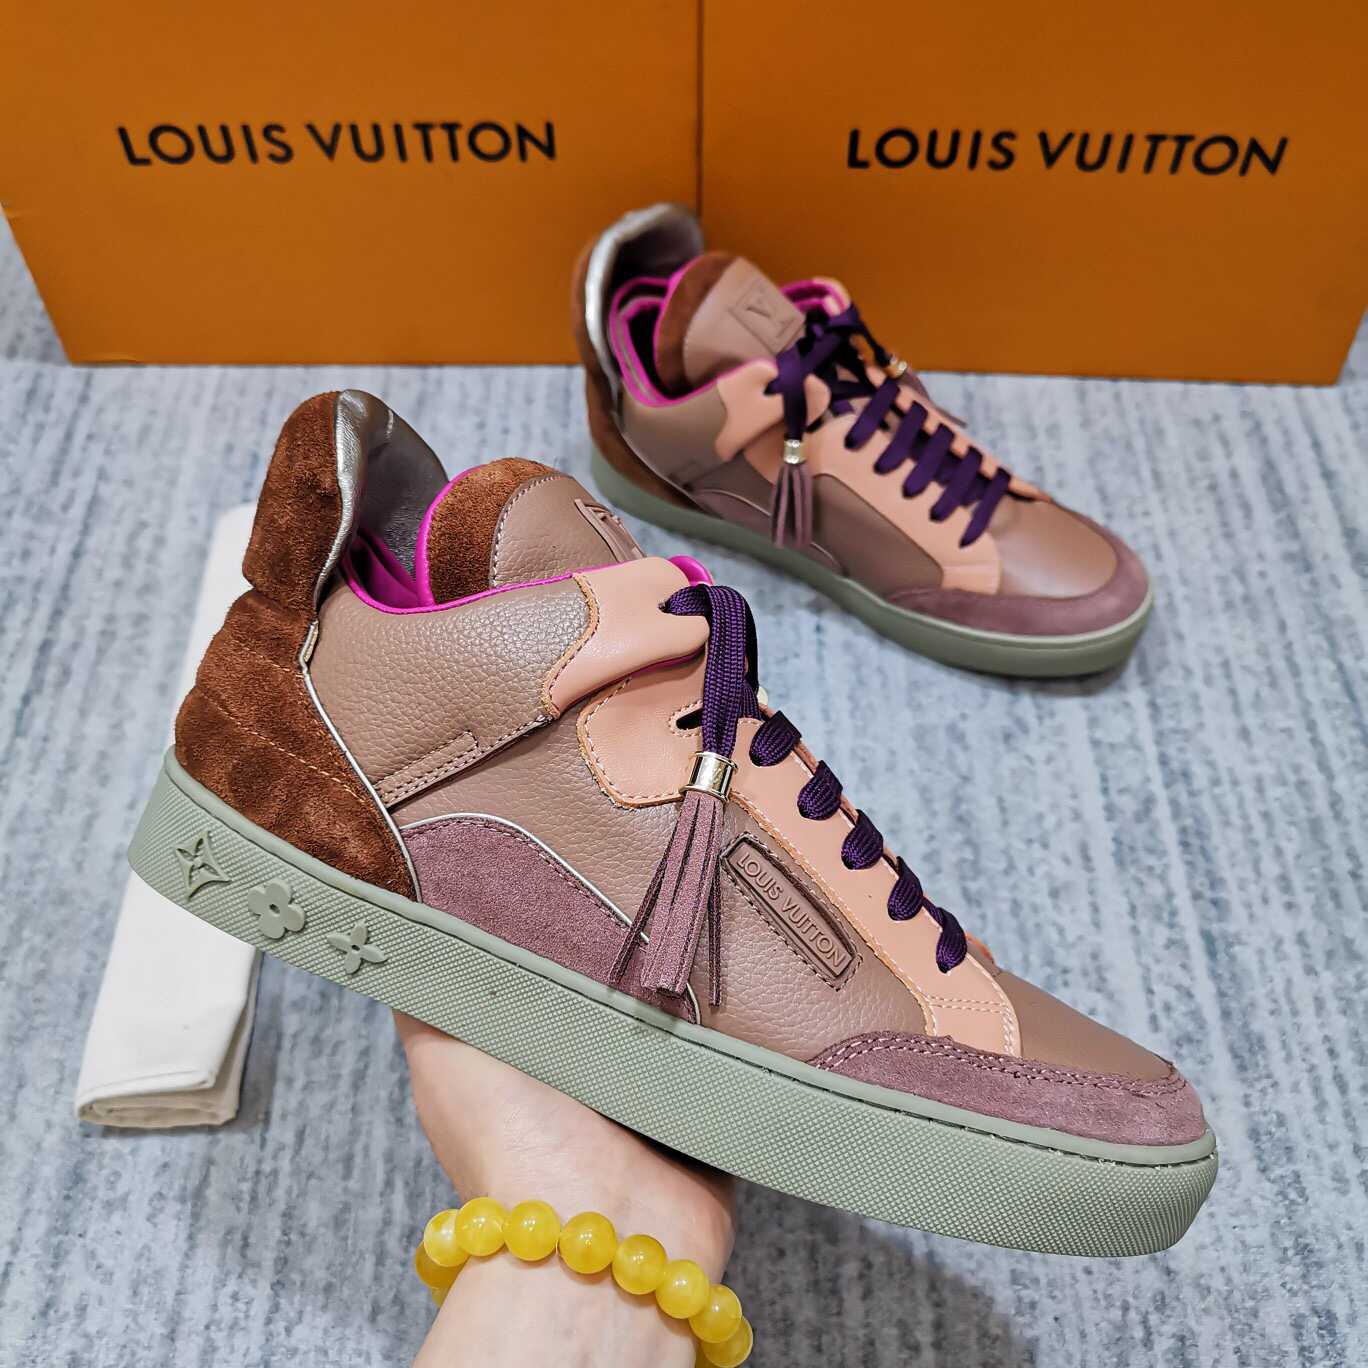 Kanye West x Louis Vuittion Don Patchwork联名款运动鞋